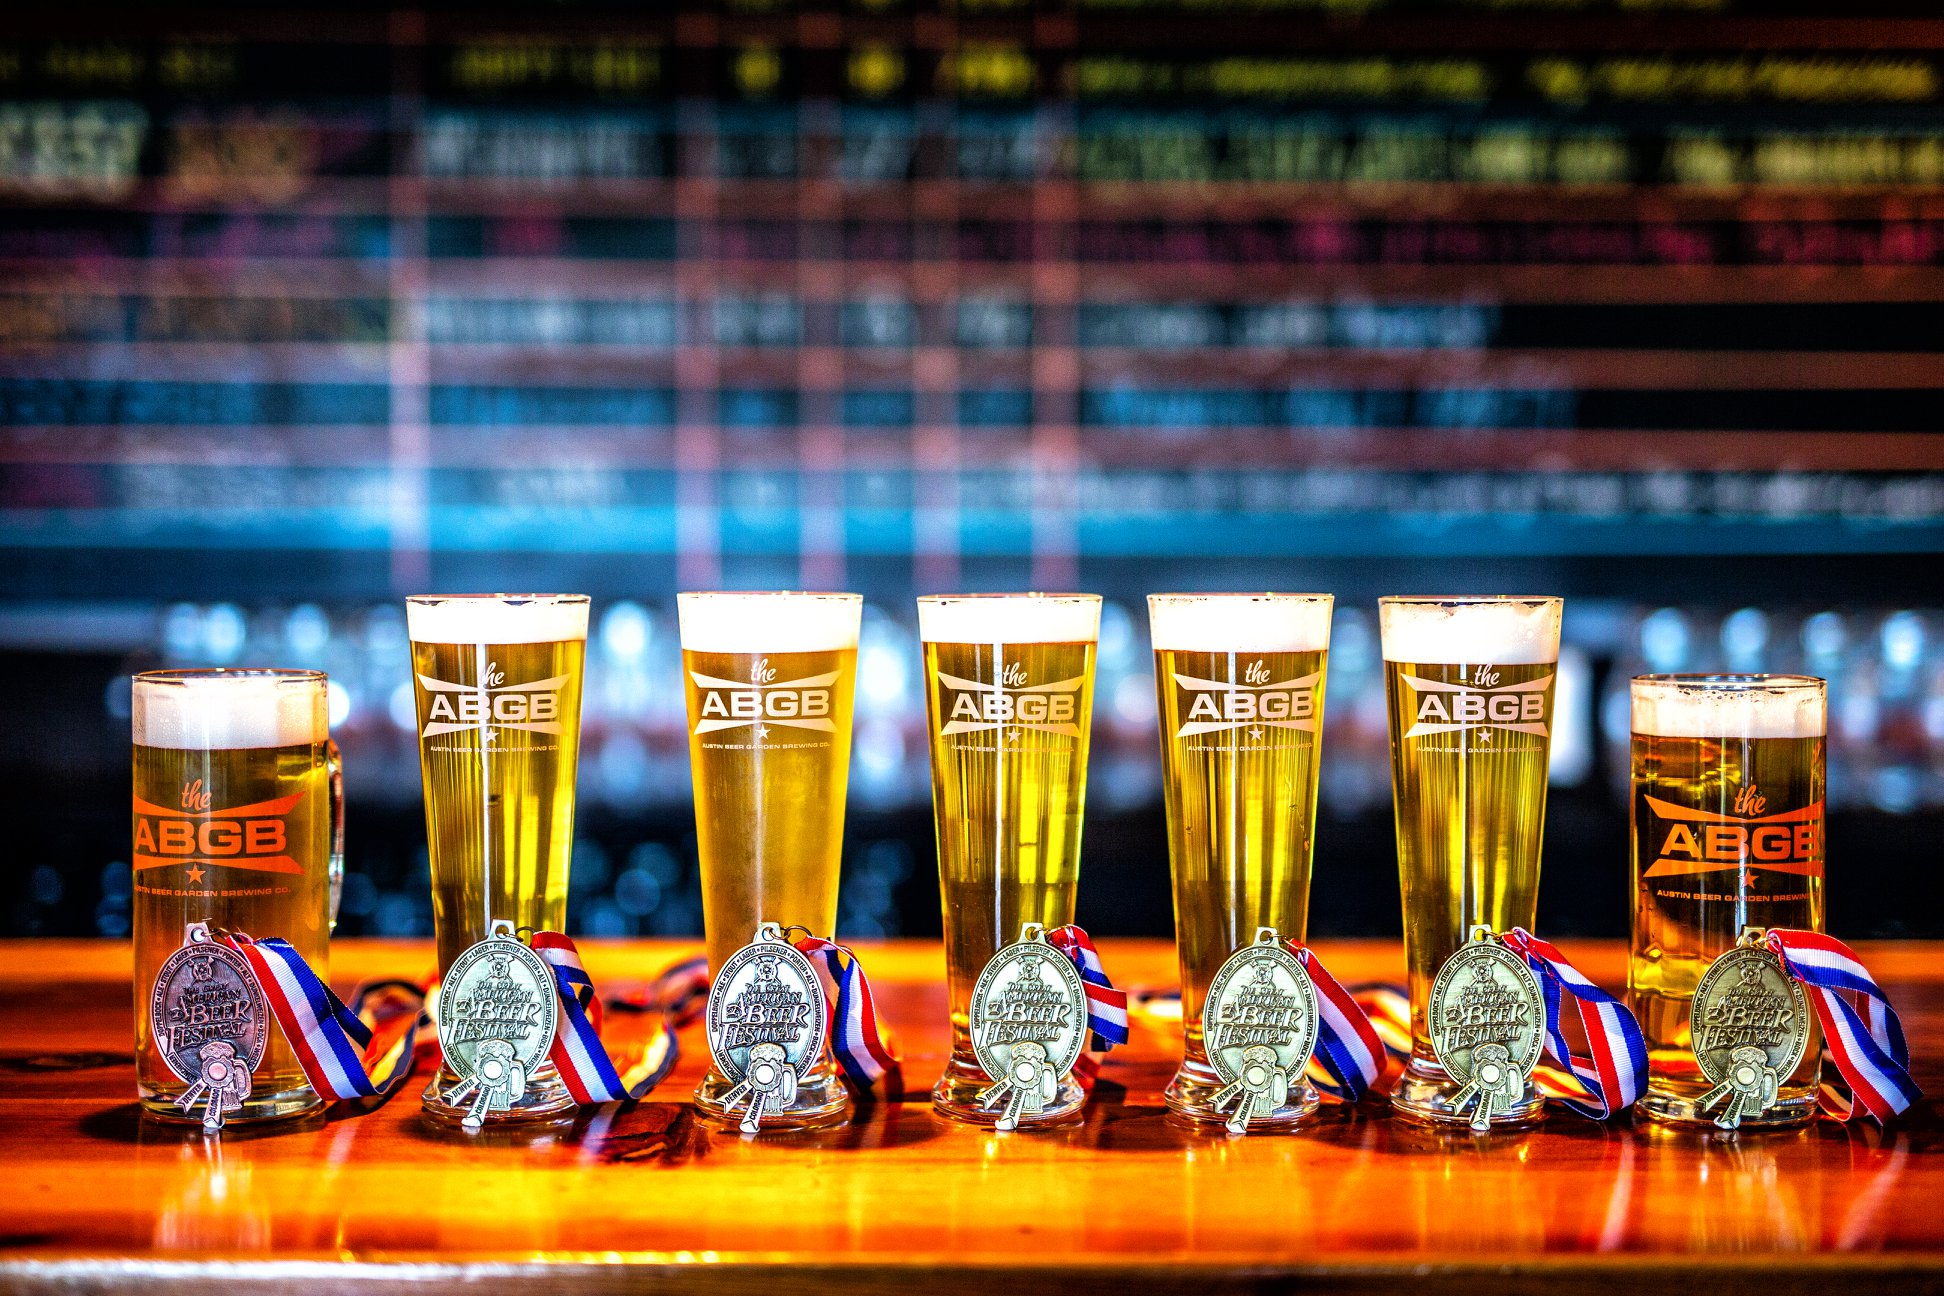 Ultimate 6er Gabf Gold Medal Winners From Texas Porchdrinking Com